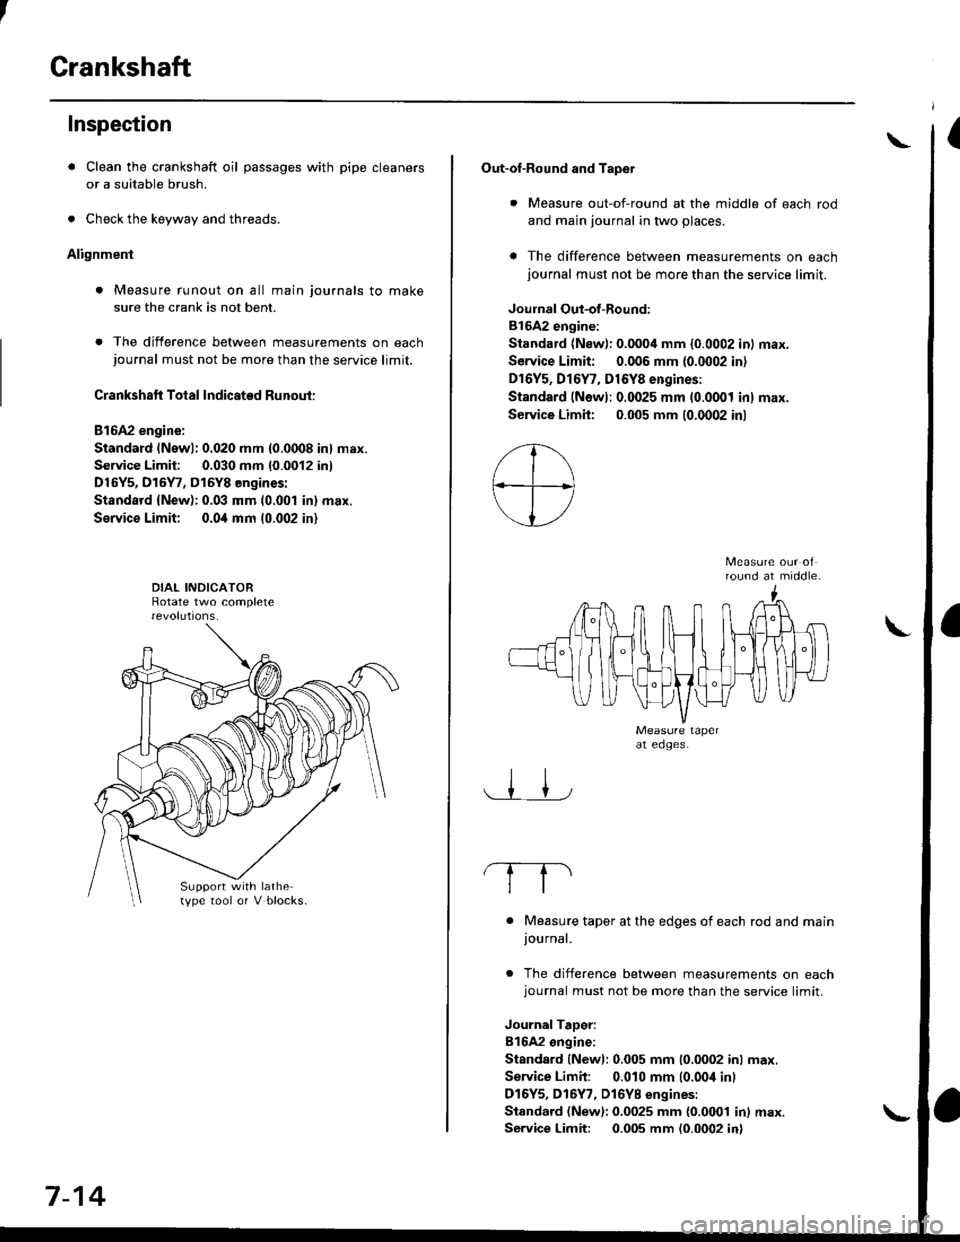 HONDA CIVIC 2000 6.G Workshop Manual Crankshaft
Inspection
. Clean the crankshaft oil passages with pipe cleaners
or a suitable brush.
. Check the keyway and threads.
Alignment
. Measure runout on all main journals to make
sure the crank